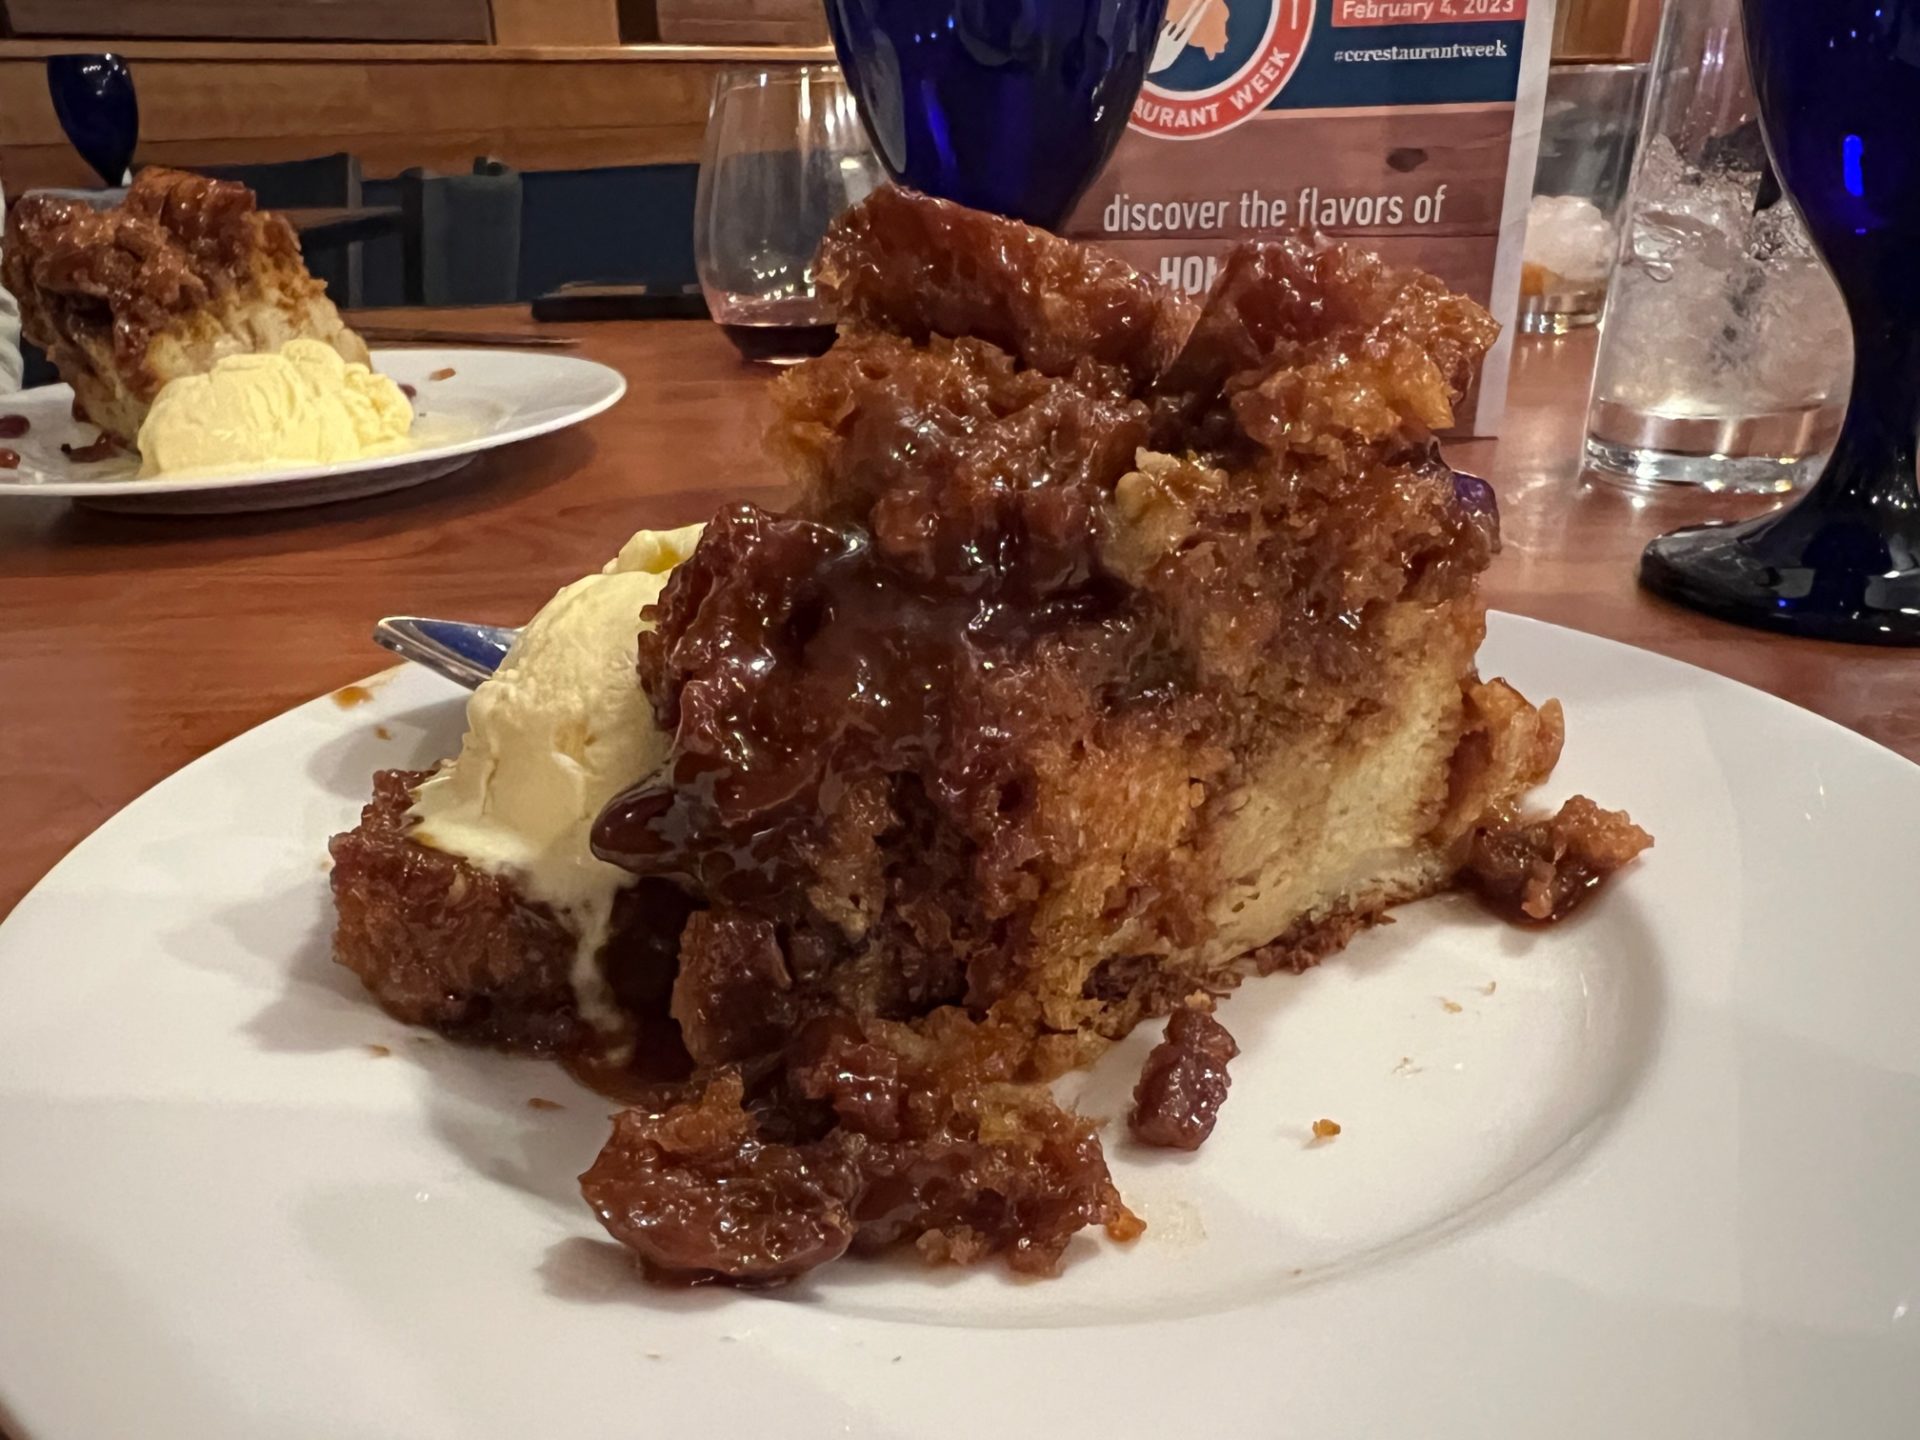 A large slice of bread pudding, covered in a dark brown, thick sauce. Two scoops of vanilla ice cream sit next to it on the round, white plate.